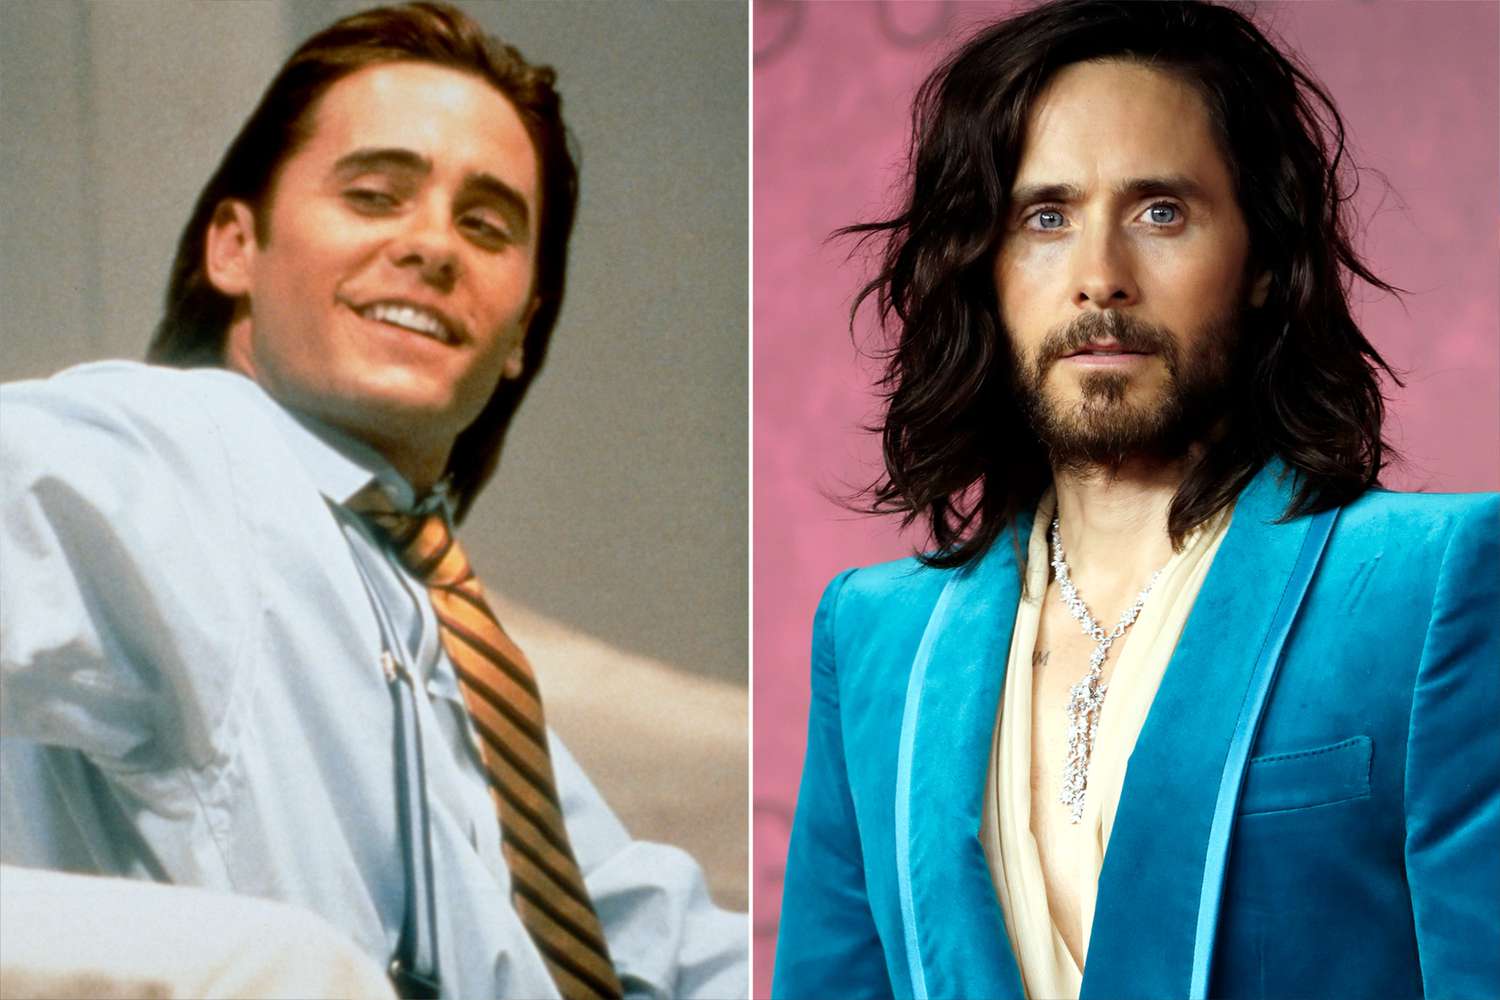 American Psycho: Where Are They Now?